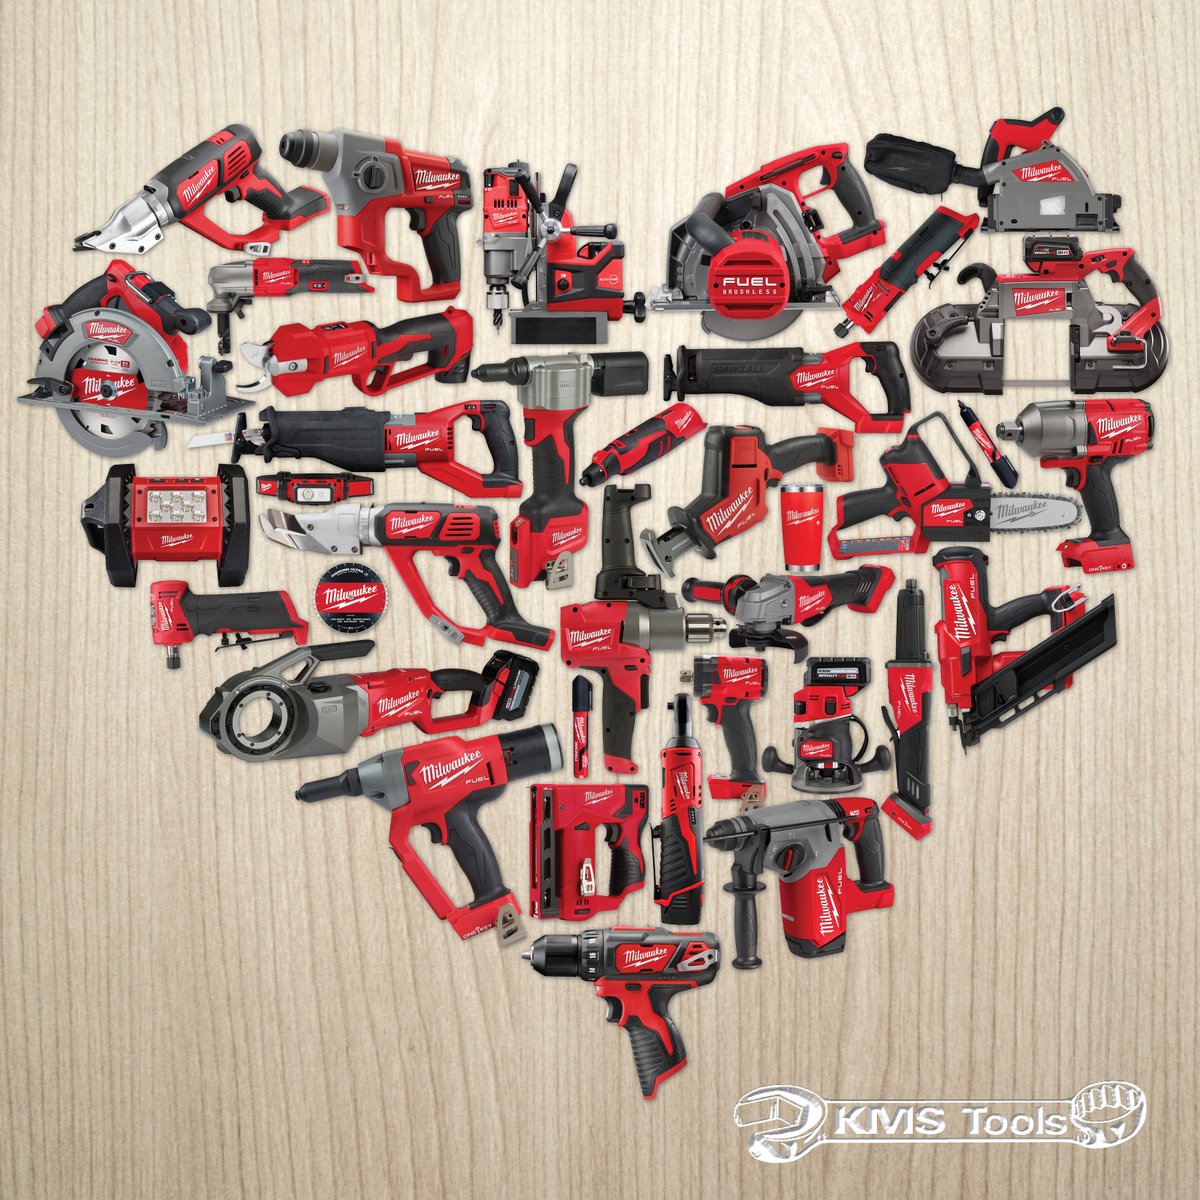 Shop Red for your Sweetheart this Valentine's Day!  🧰💘
We've got your back, at KMS Tools.
kmstools.com/featured-brand…

#HappyValentinesDay #MilwaukeeTools #MilwaukeePowerTools #MilwaukeePackout #M18 #Milwaukee18V #NothingButHeavyDuty #NBHD #MilwaukeeTool #ToolsOfTheTrade #KMSTools